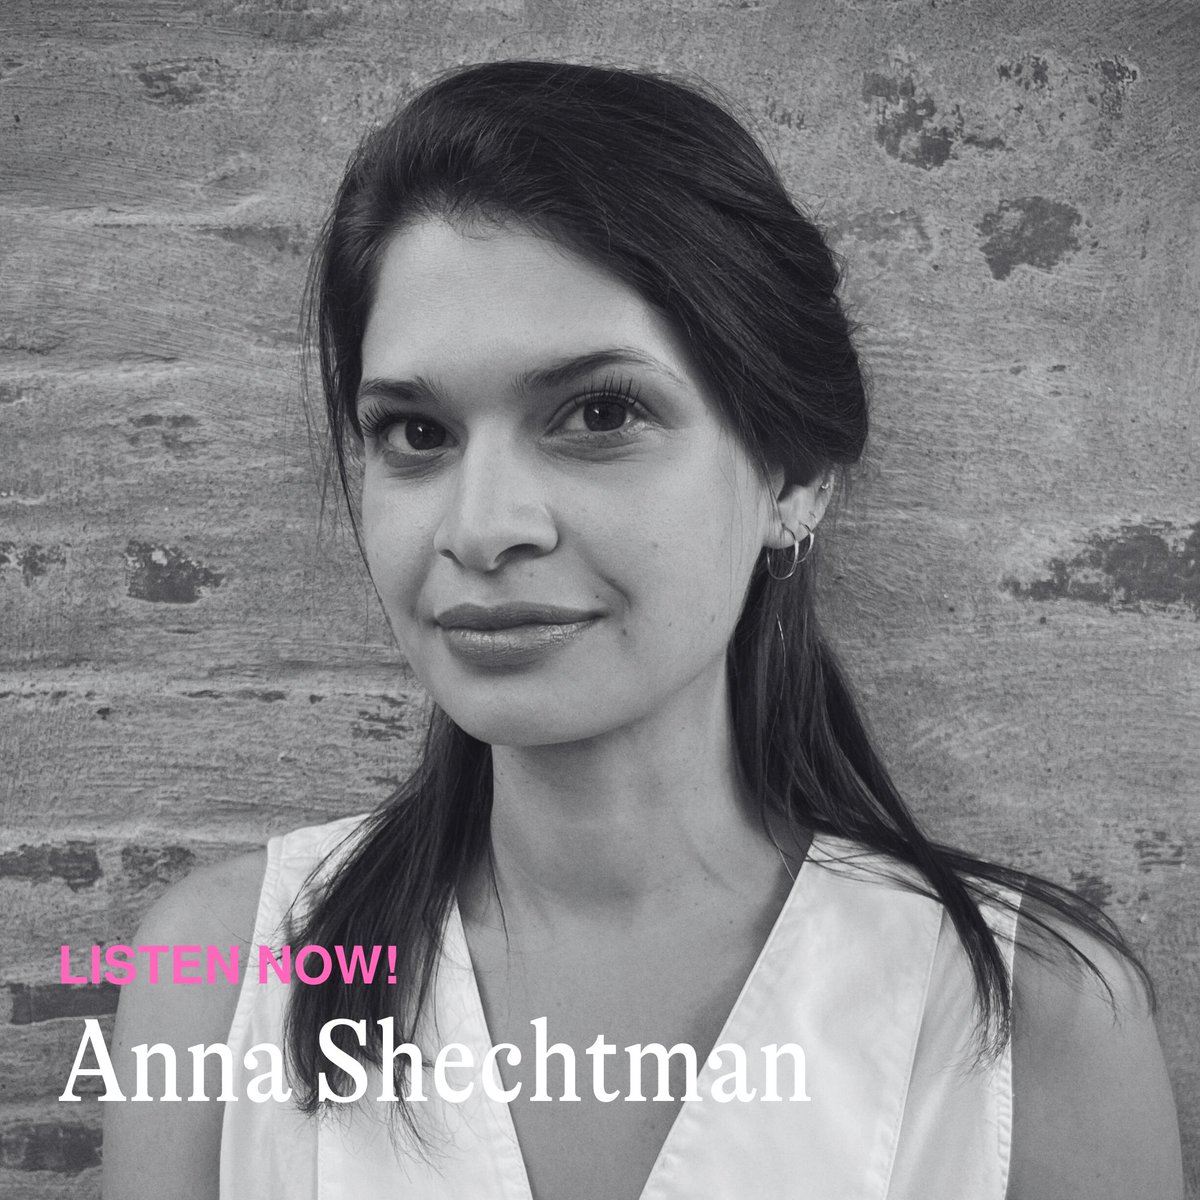 .@annashechtman joins #LARBRadioHour to discuss 'The Riddles of the Sphinx: Inheriting the Feminist History of the Crossword Puzzle.' Her book is a history of how women shaped the crossword puzzle and a memoir of her own start in crossword constructing. lareviewofbooks.org/av/anna-shecht…